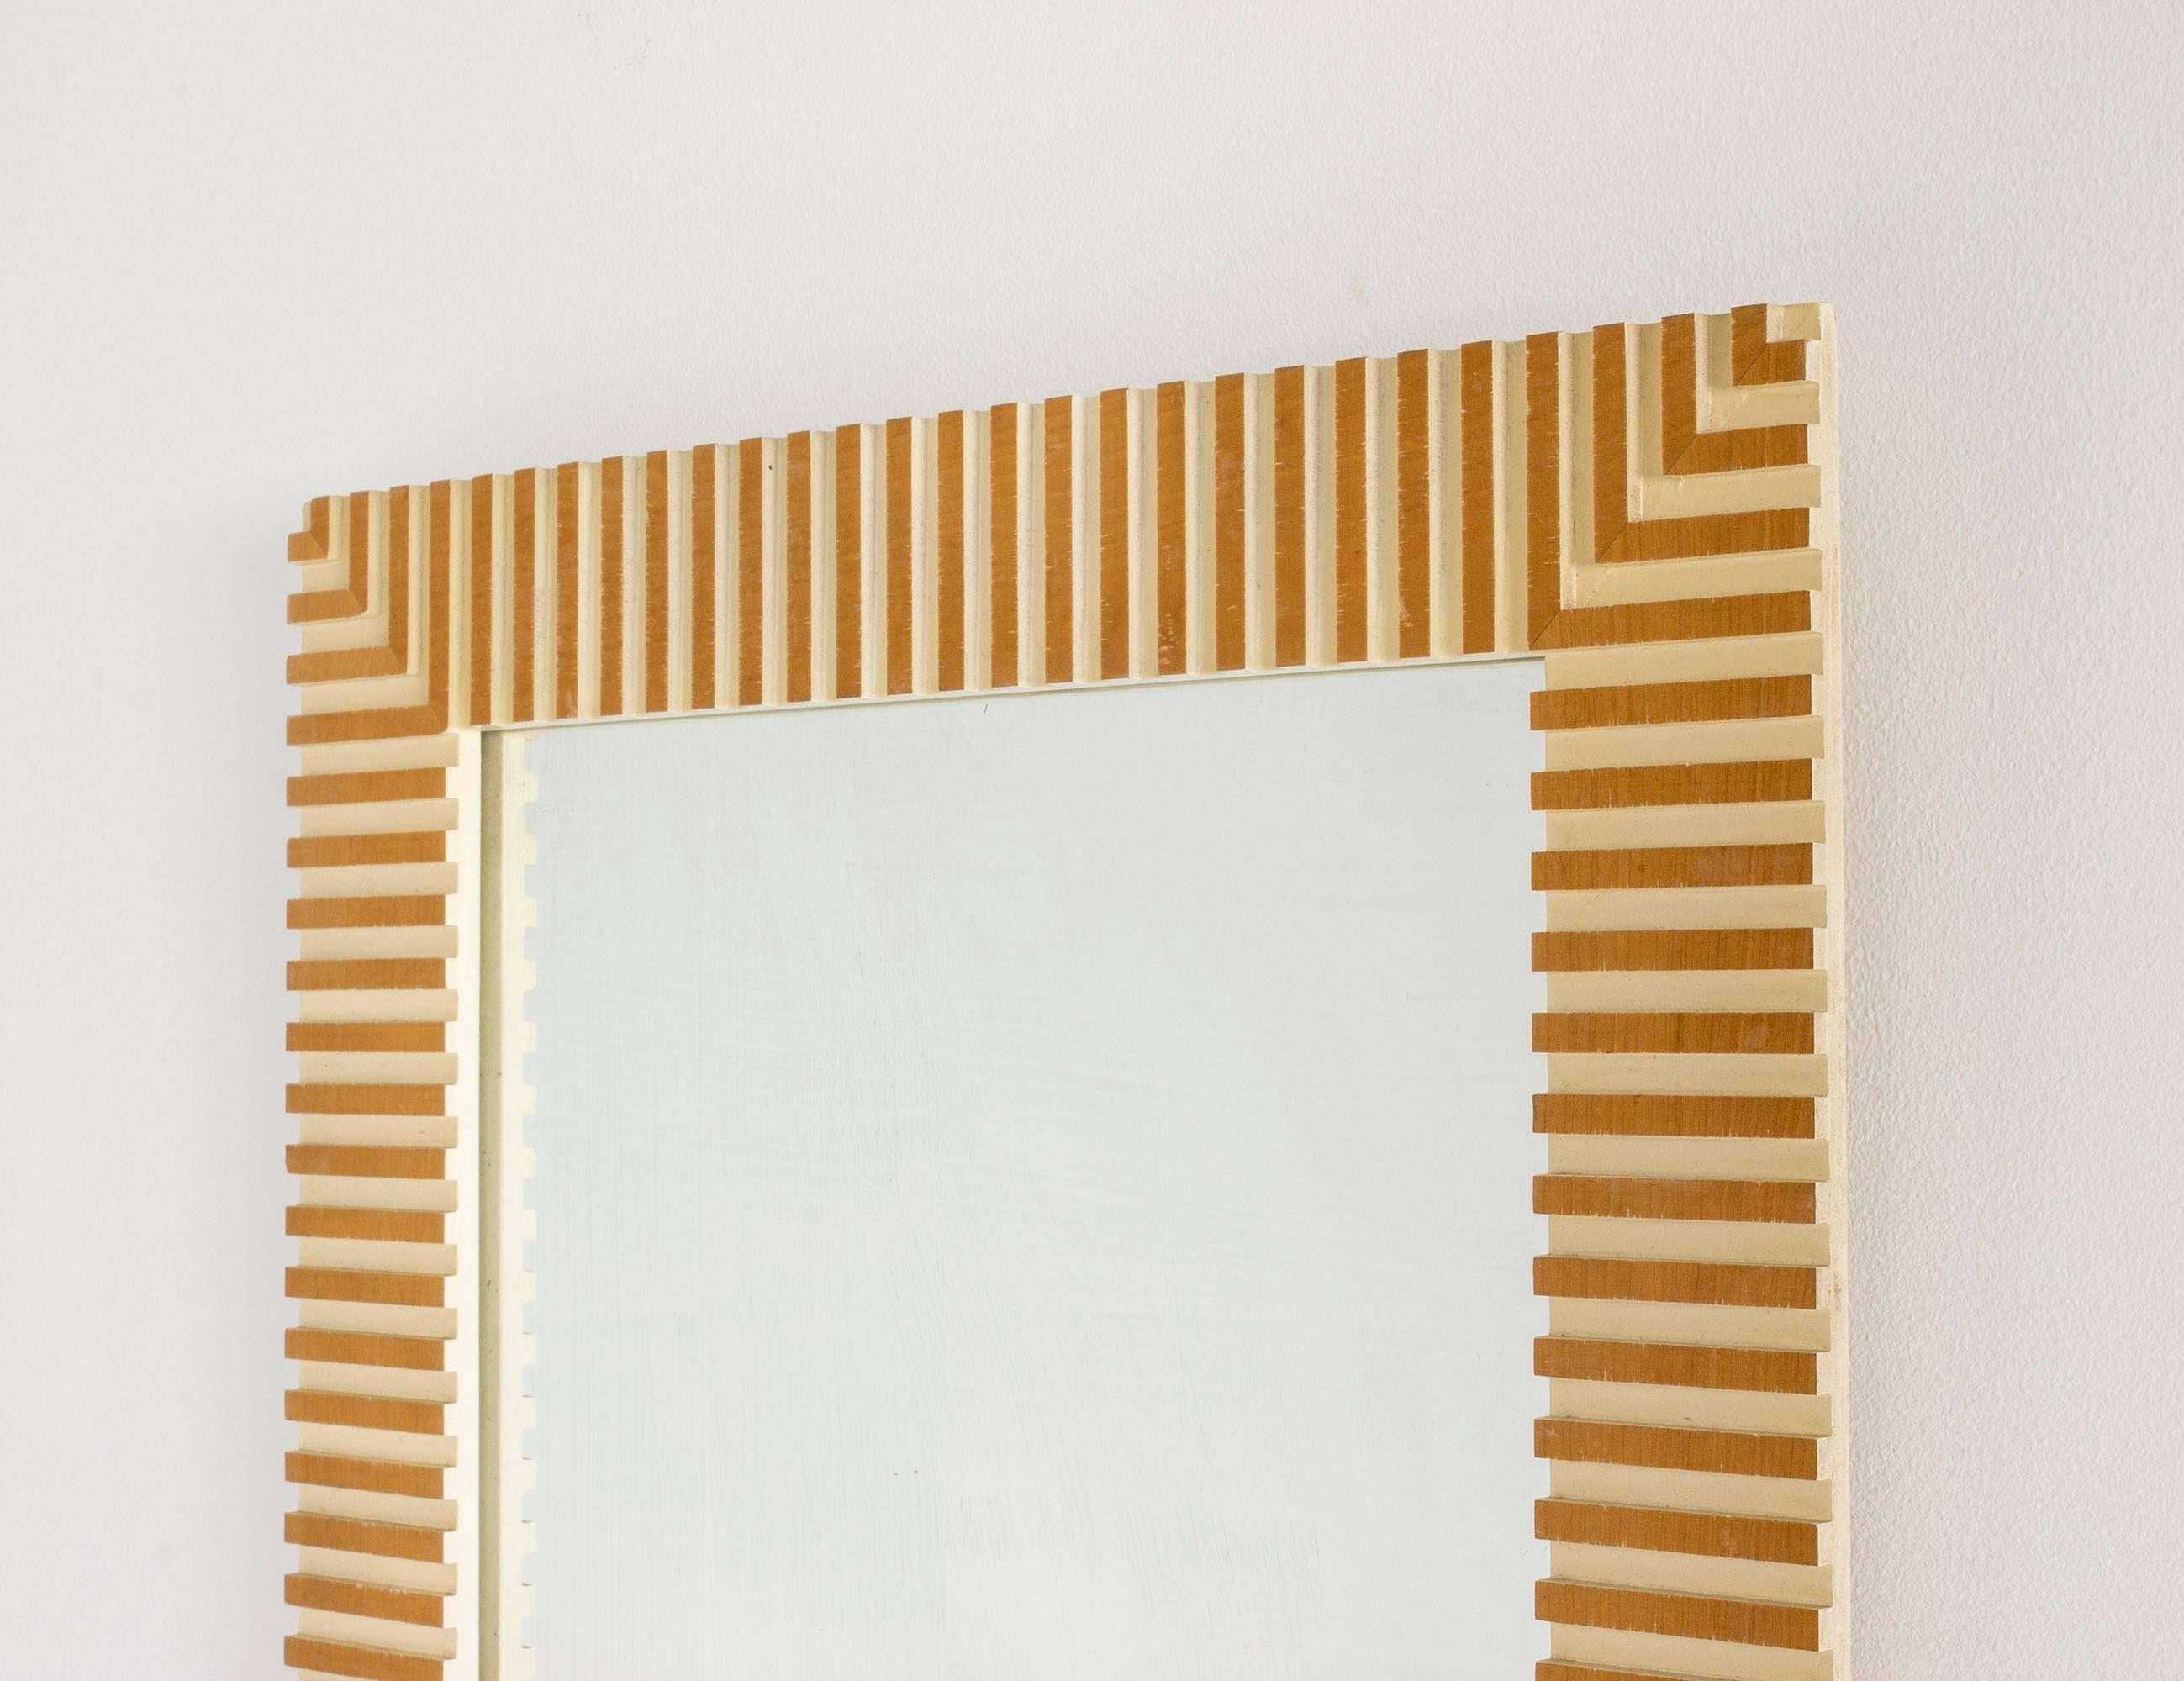 Striking, timeless wall mirror by Susanne Tucker and Maurice Holland, made from wood embossed in a geometrical fashion. Frame lacquered white inside the embossments, with wood exposed on the surface, giving an impression of it being gilded.